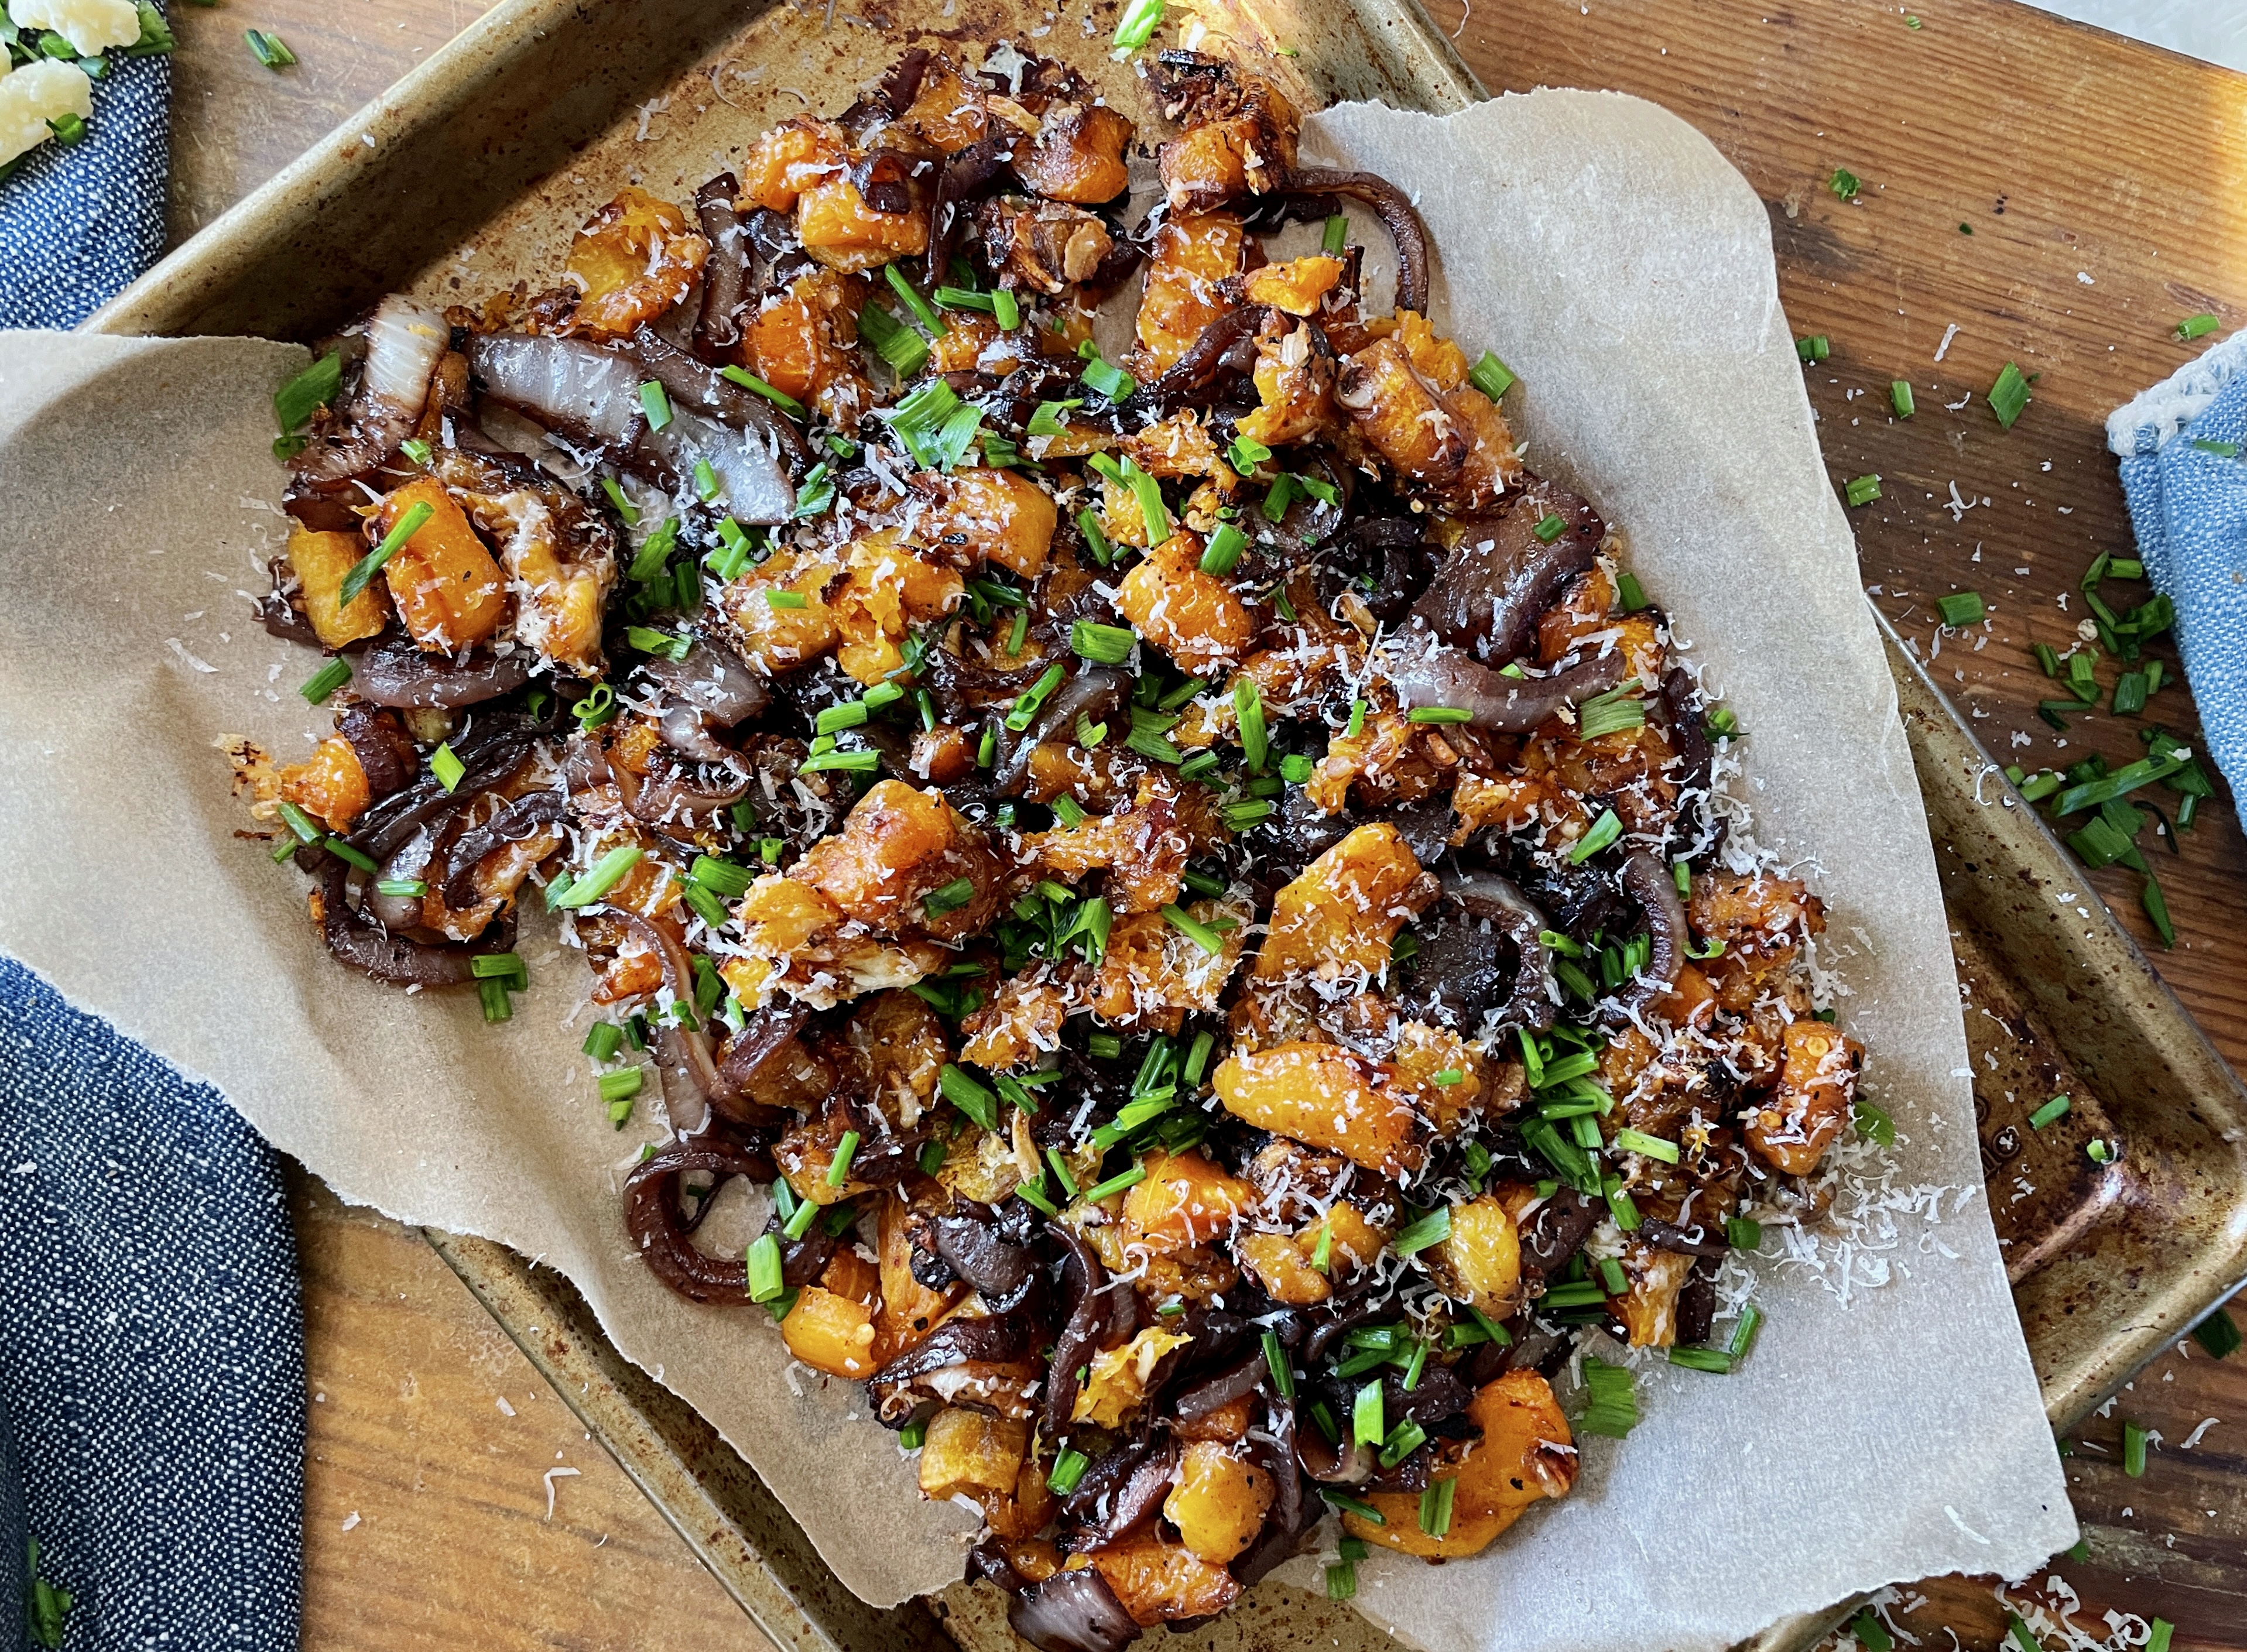 Golden, smashed, and perfectly glazed butternut squash cubes layered with red wine caramelized sweet onions and all the cheese: this French Onion Smashed Butternut Squash is the most perfect winter side.